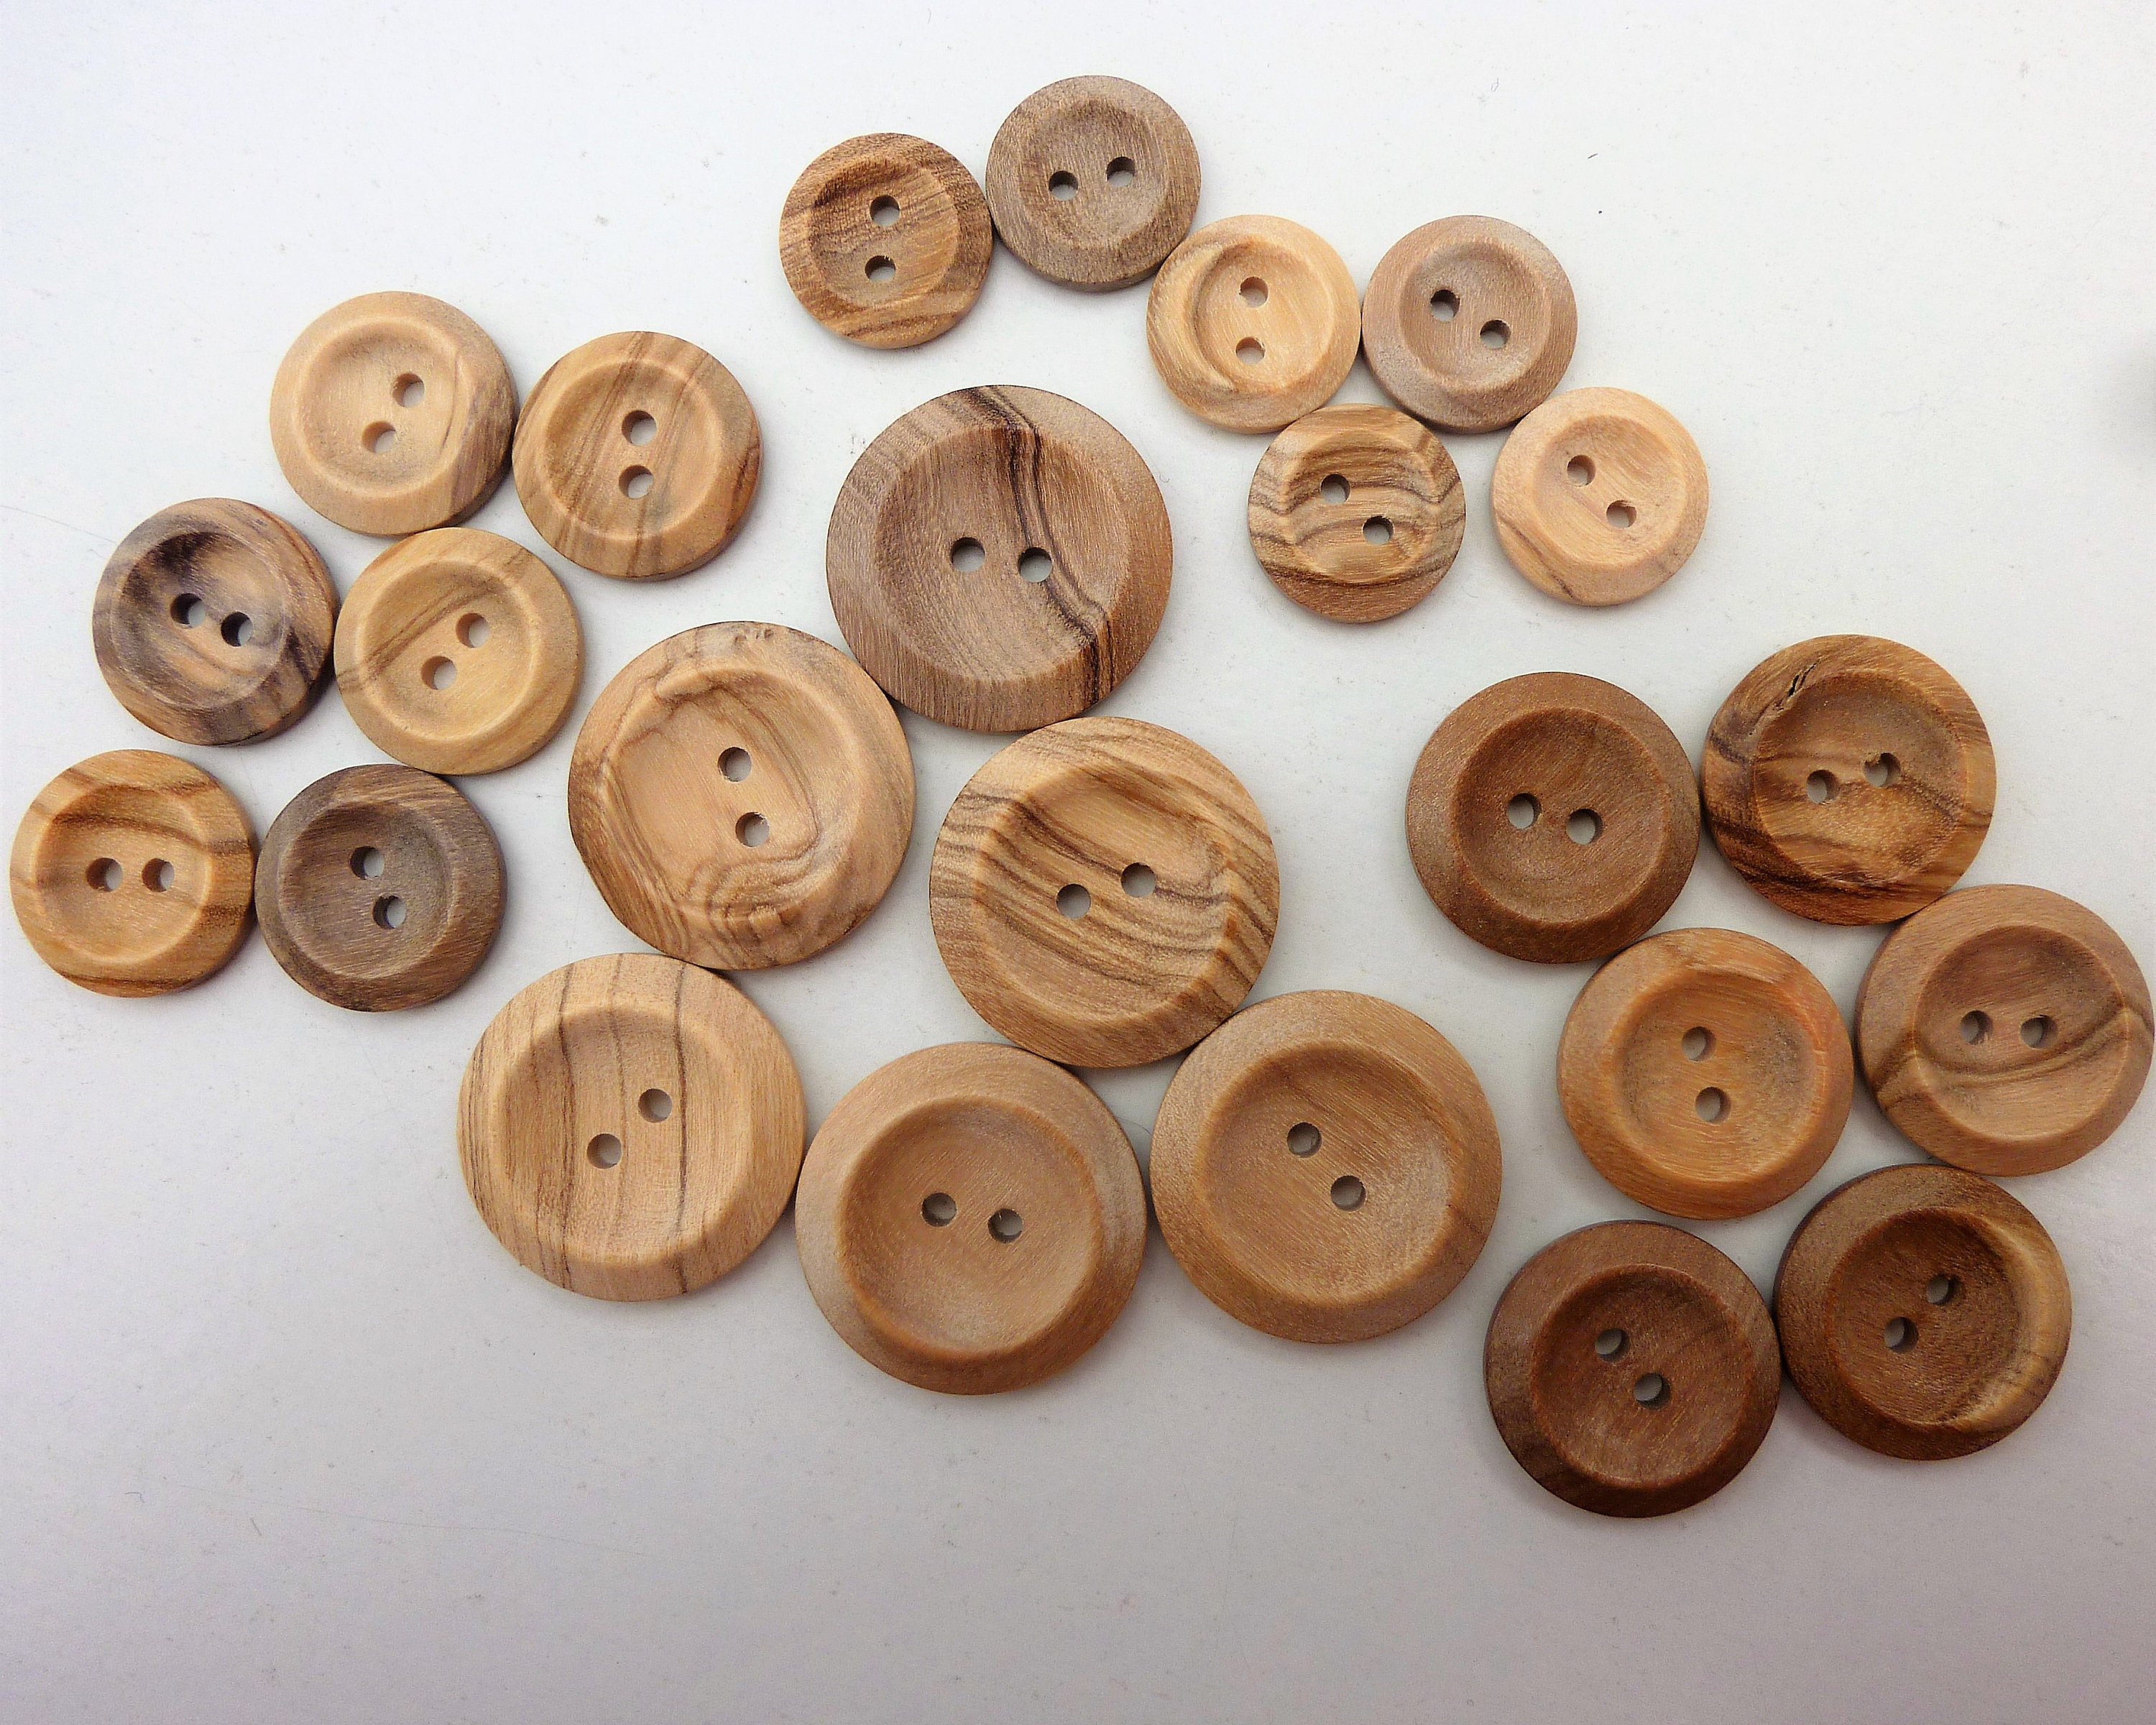 6 Wooden Buttons 2 Hole Round Light Wood Brown Grain Sweater